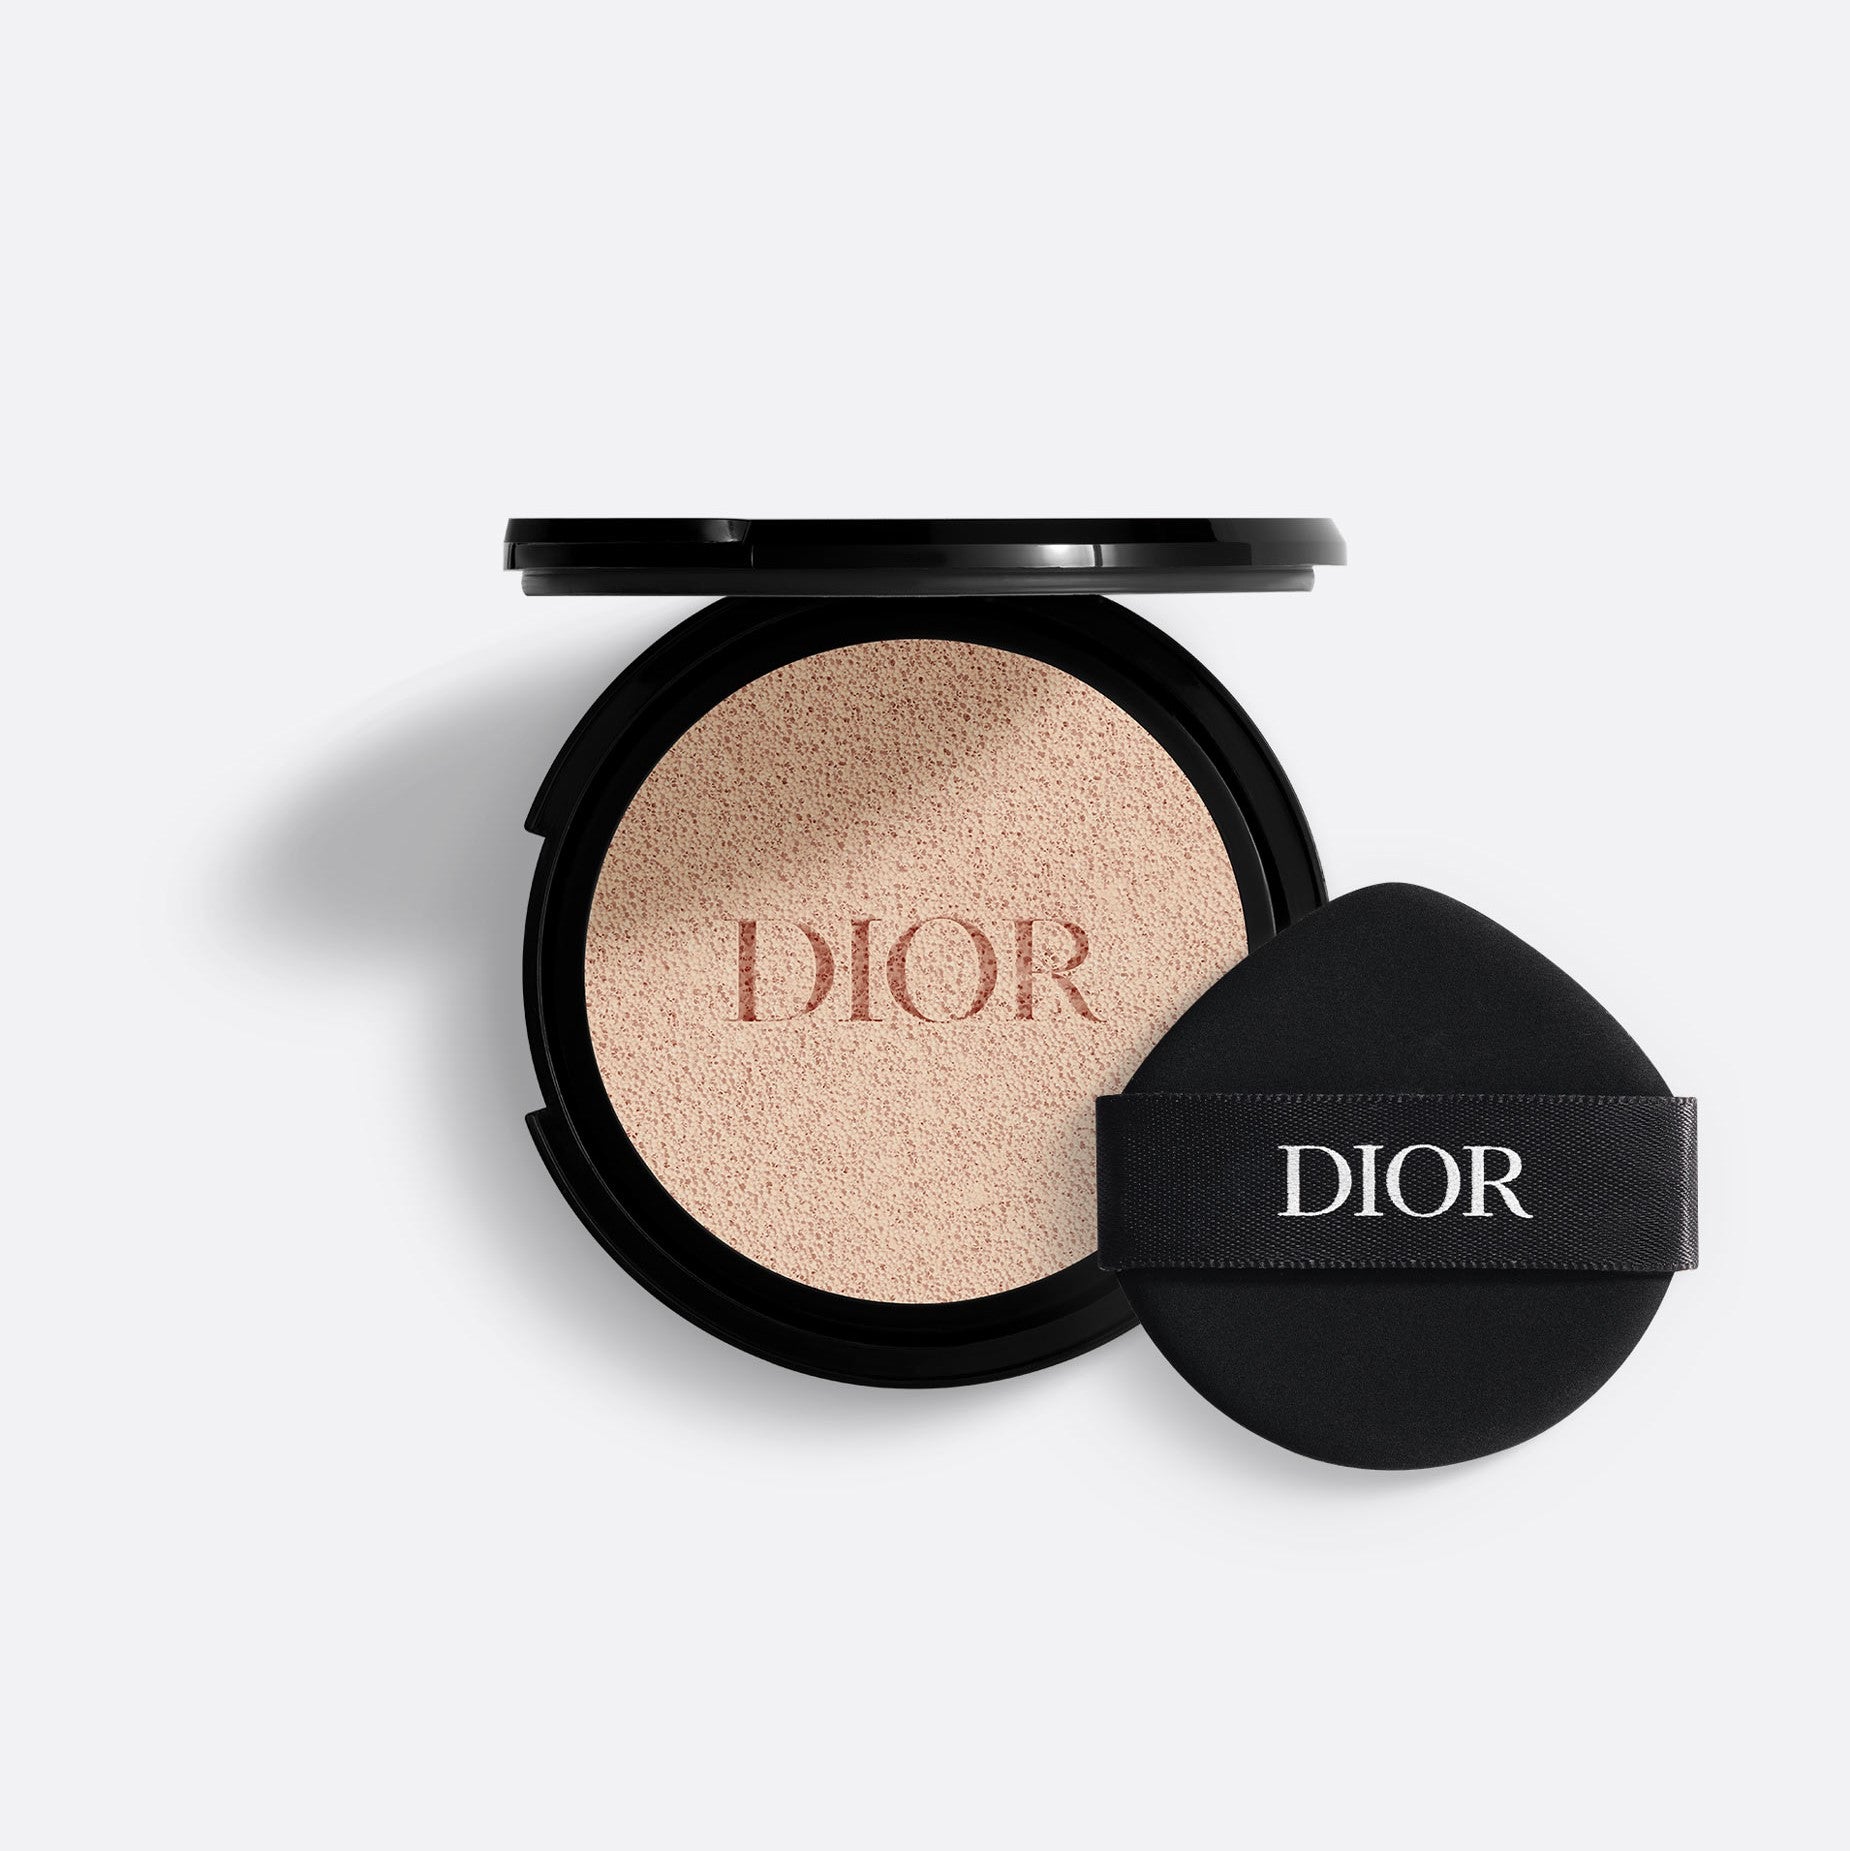 DIOR FOREVER SKIN GLOW CUSHION REFILL | Glow Finish Cushion Foundation Refill - 24h Hydration and Wear - High Perfection